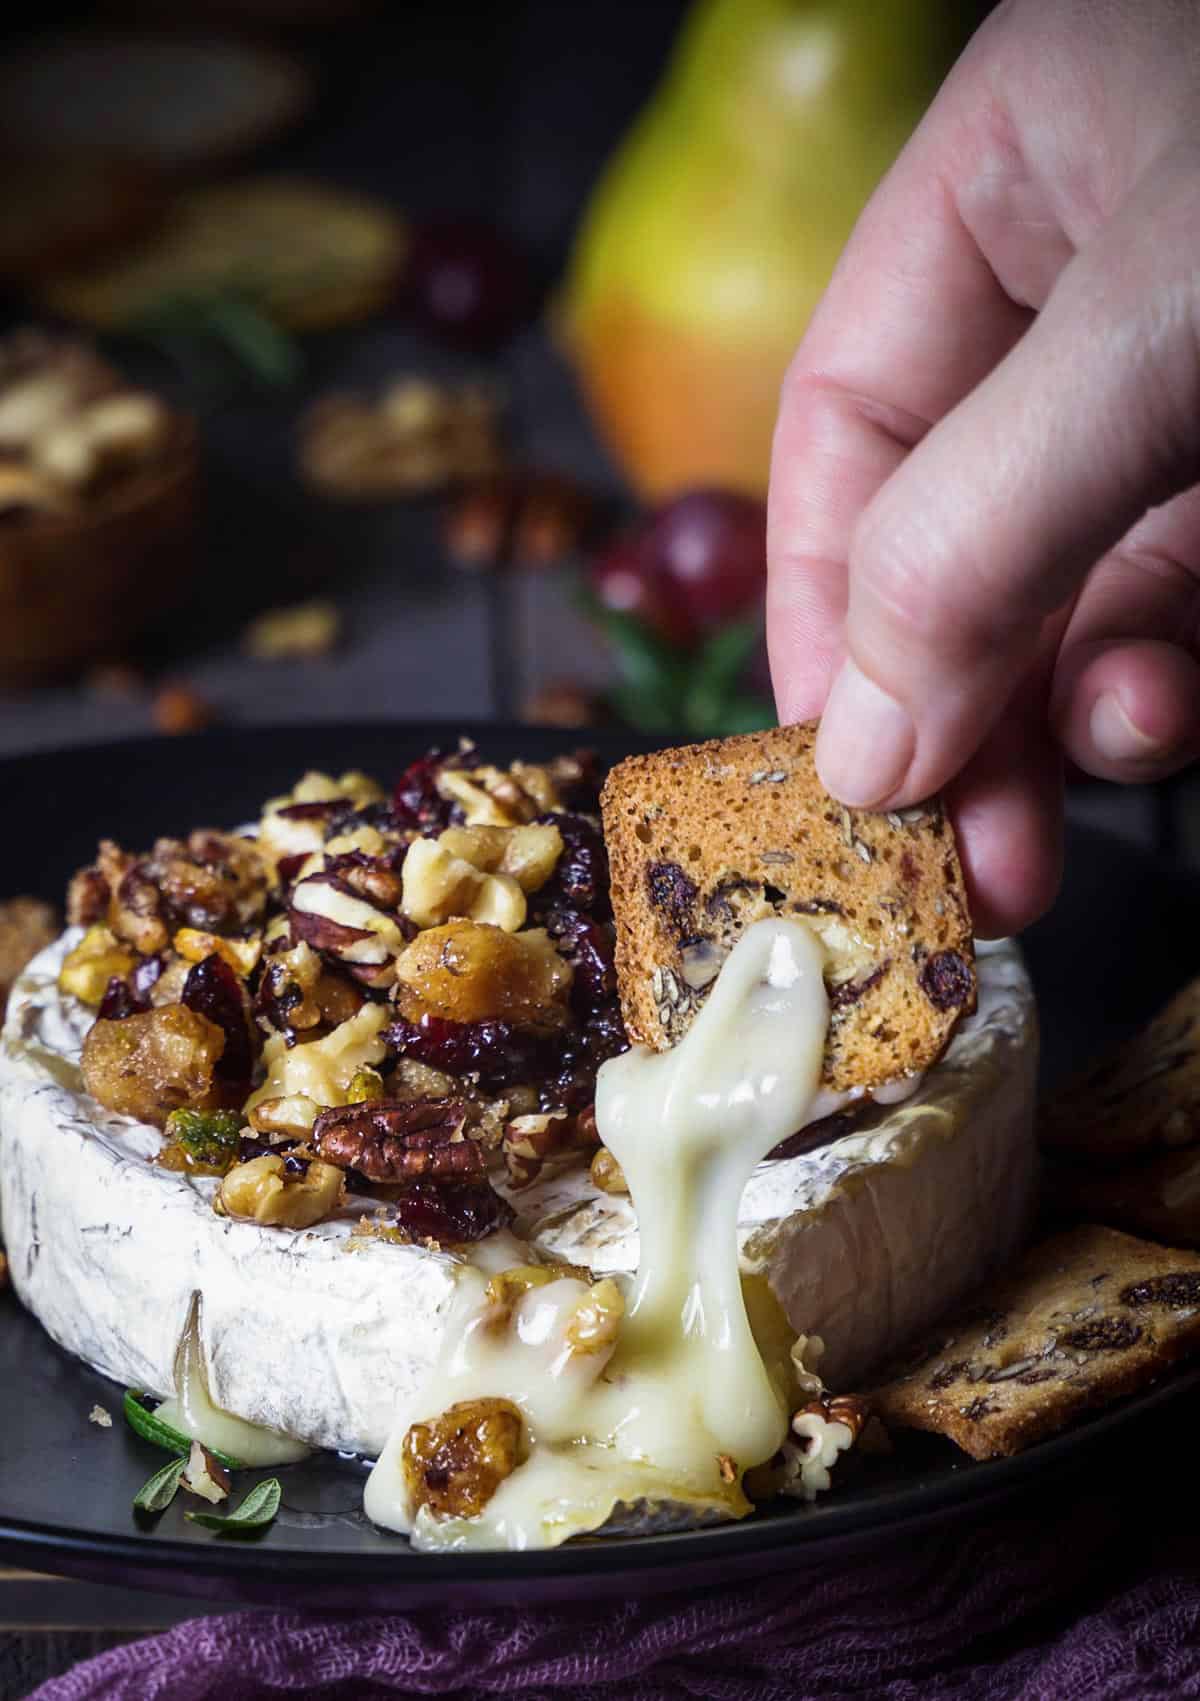 A person dipping a cracker into the melted brie cheese with walnuts, pistachios, and pecans.